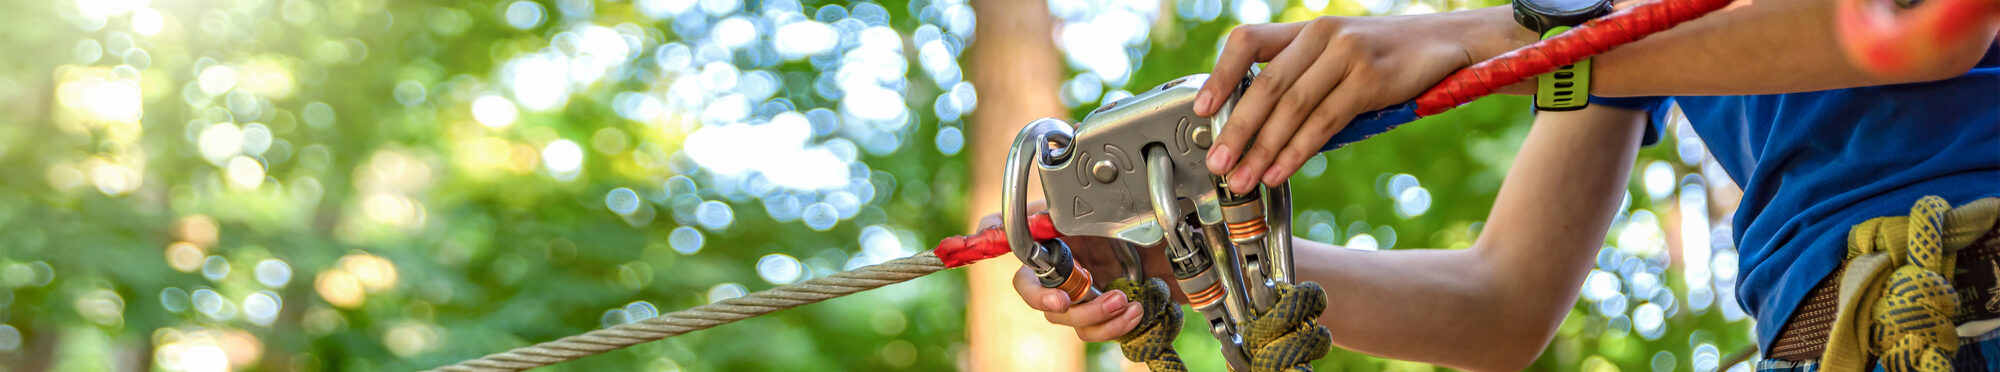 Woman hangs a carabiner on a rope in a forest adventure park. Using climbing equipment: carabiner, belt, rope. Banner for advertising, design or website header